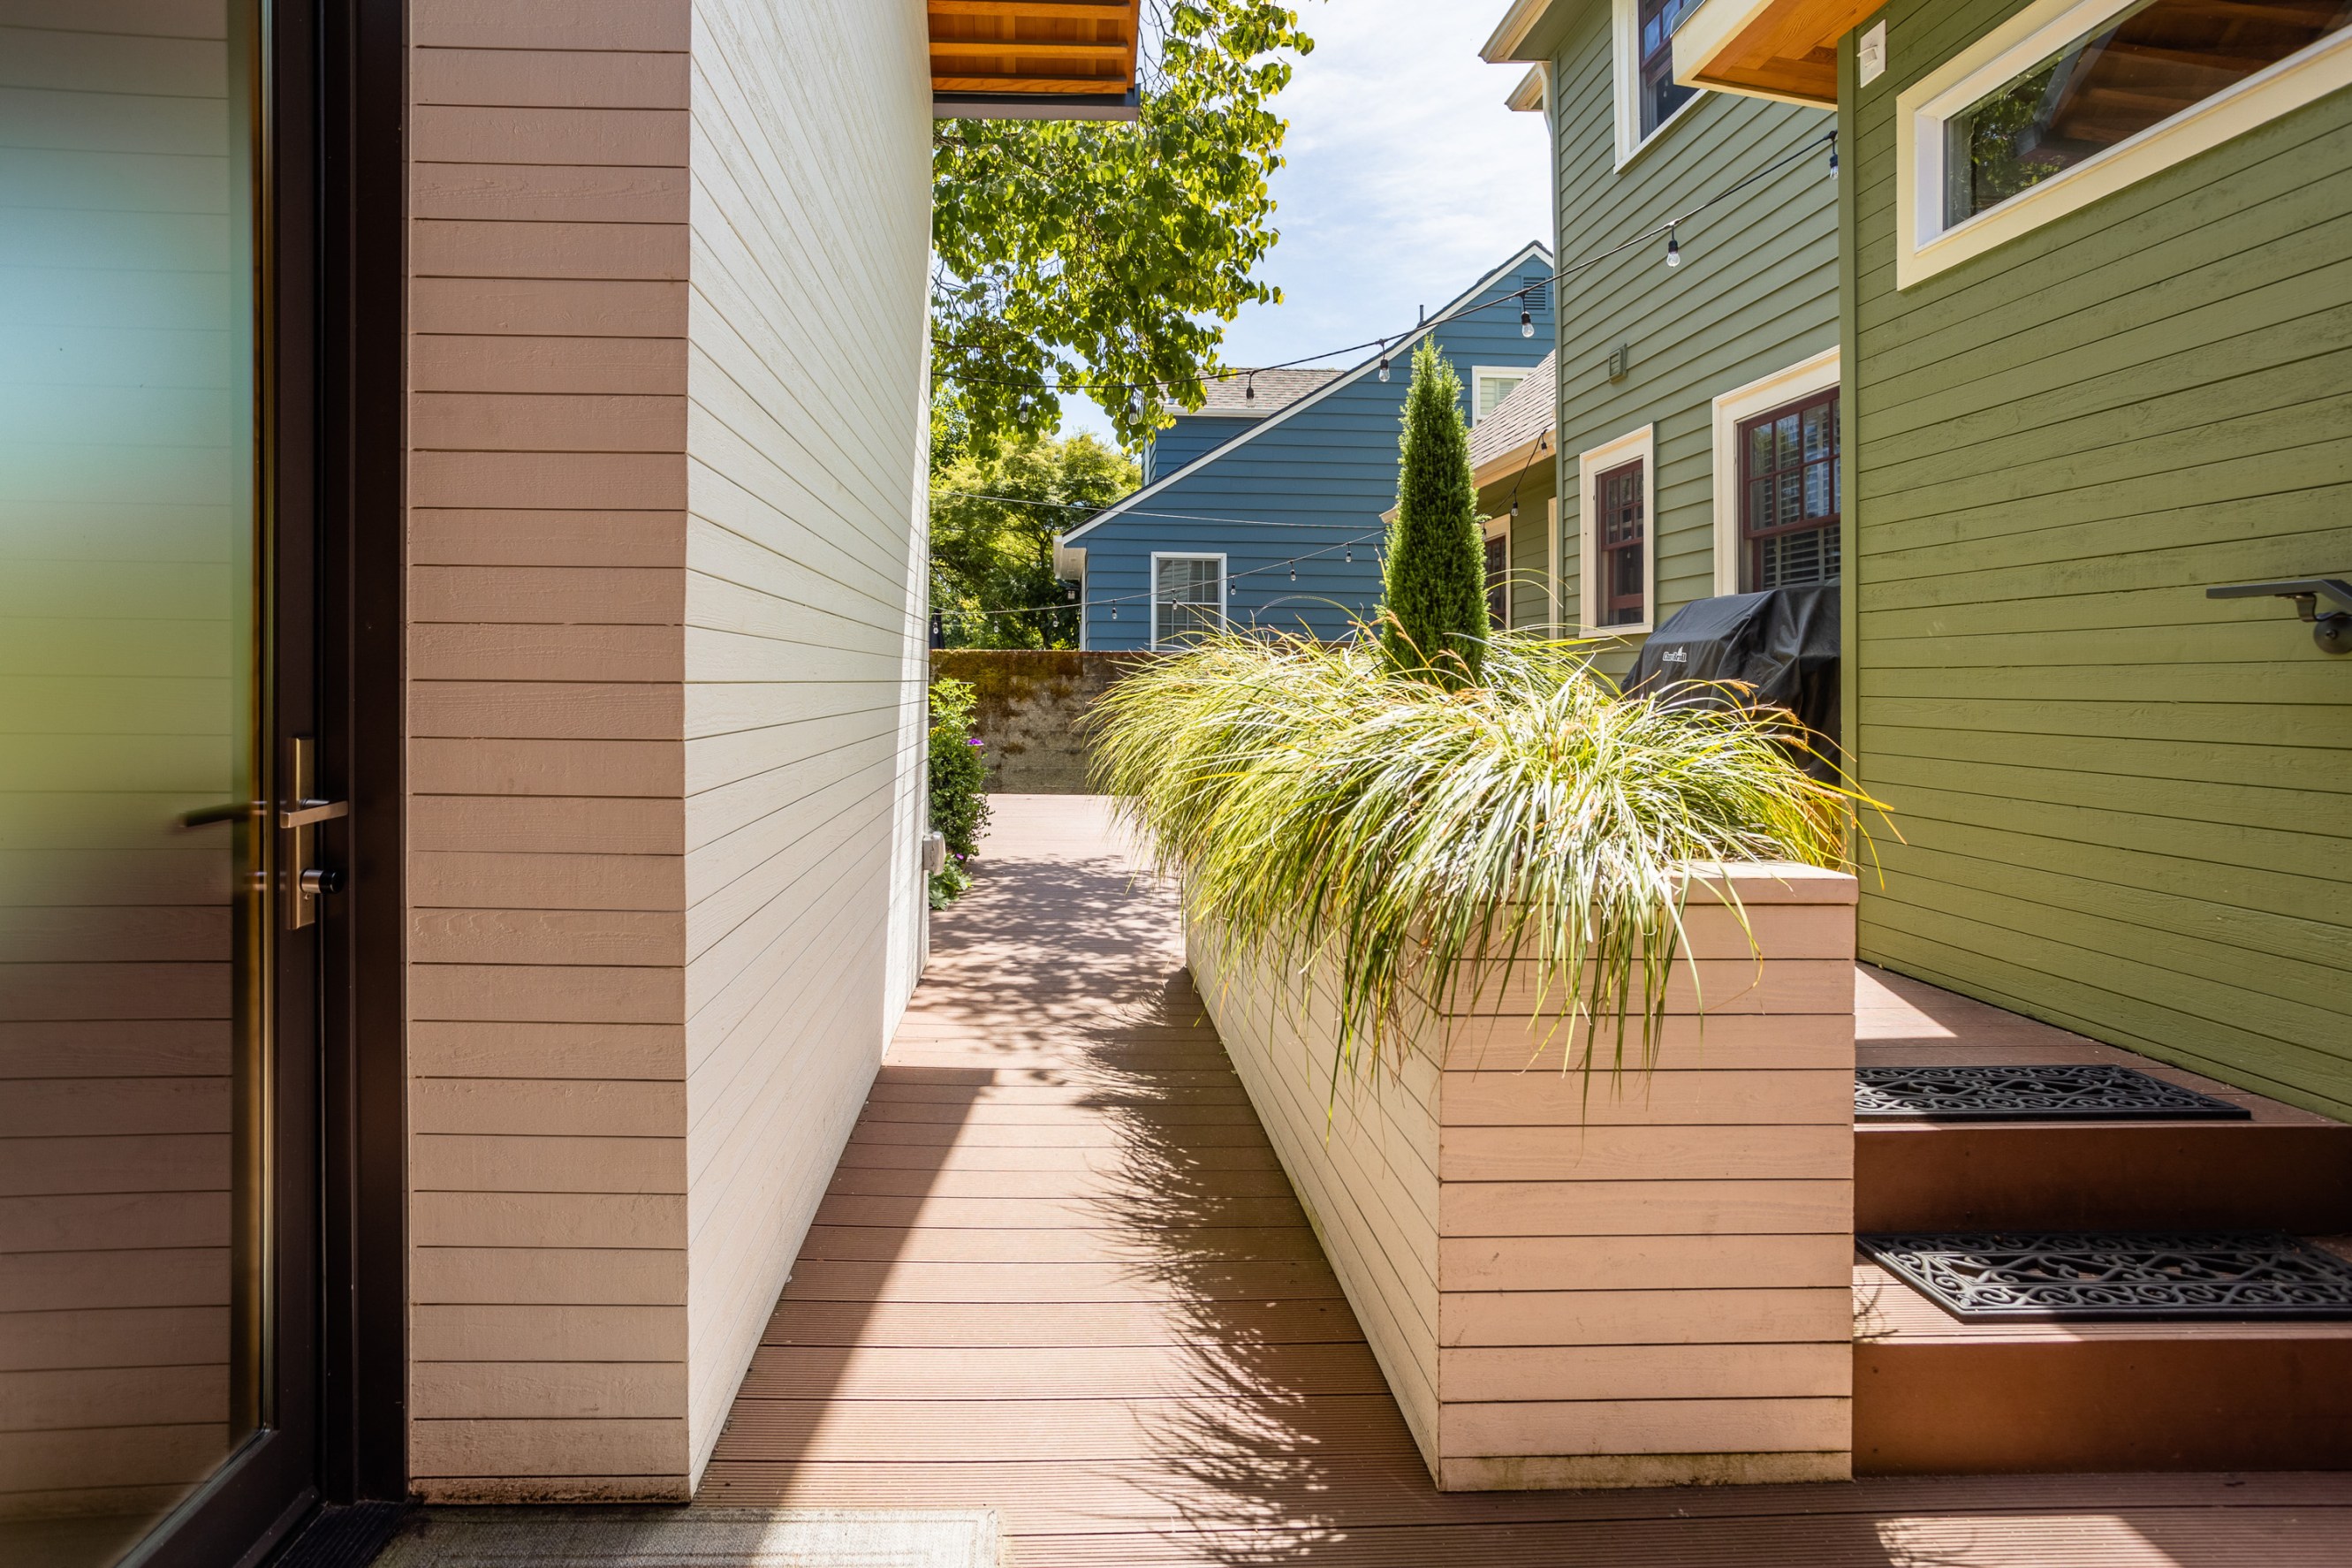 A wheelchair accessible ramp leading towards the driveway alongside a long planter with hanging grass.